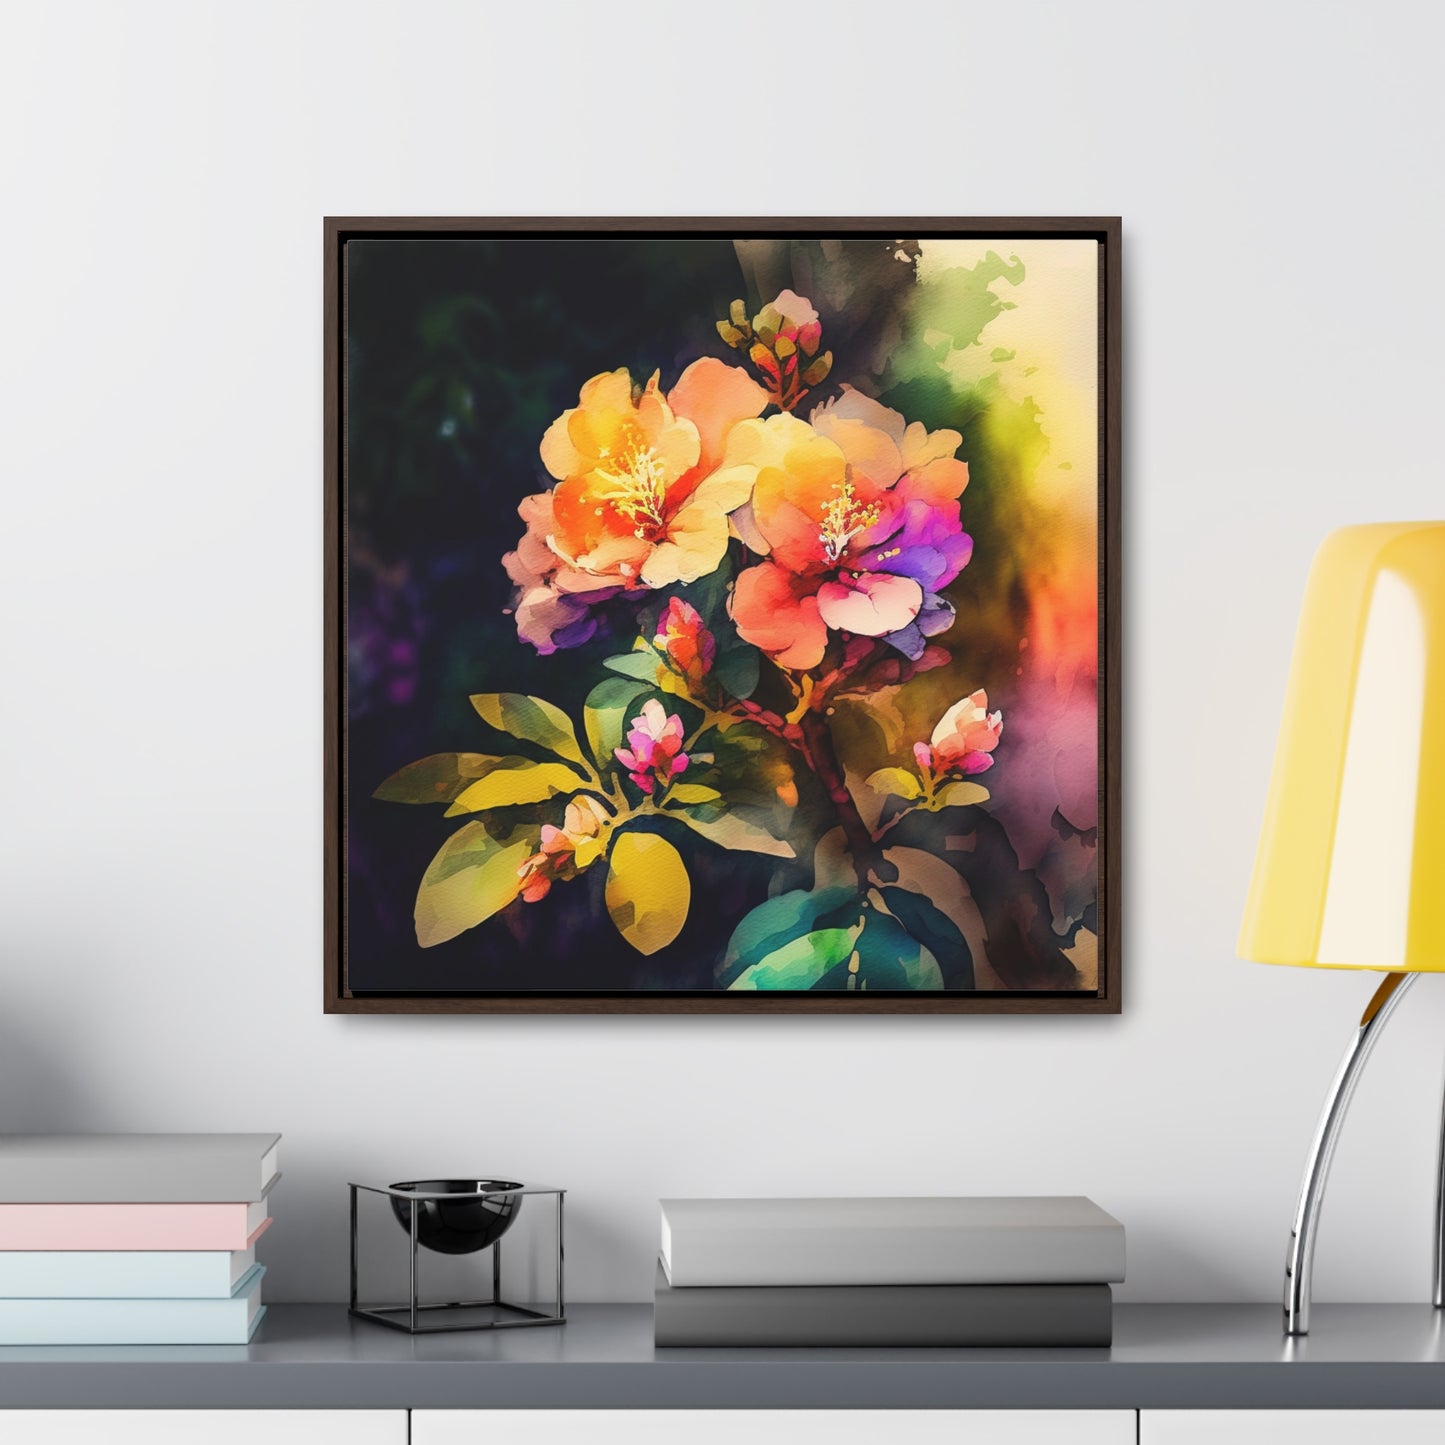 Gallery Canvas Wraps, Square Frame Bright Spring Flowers 2